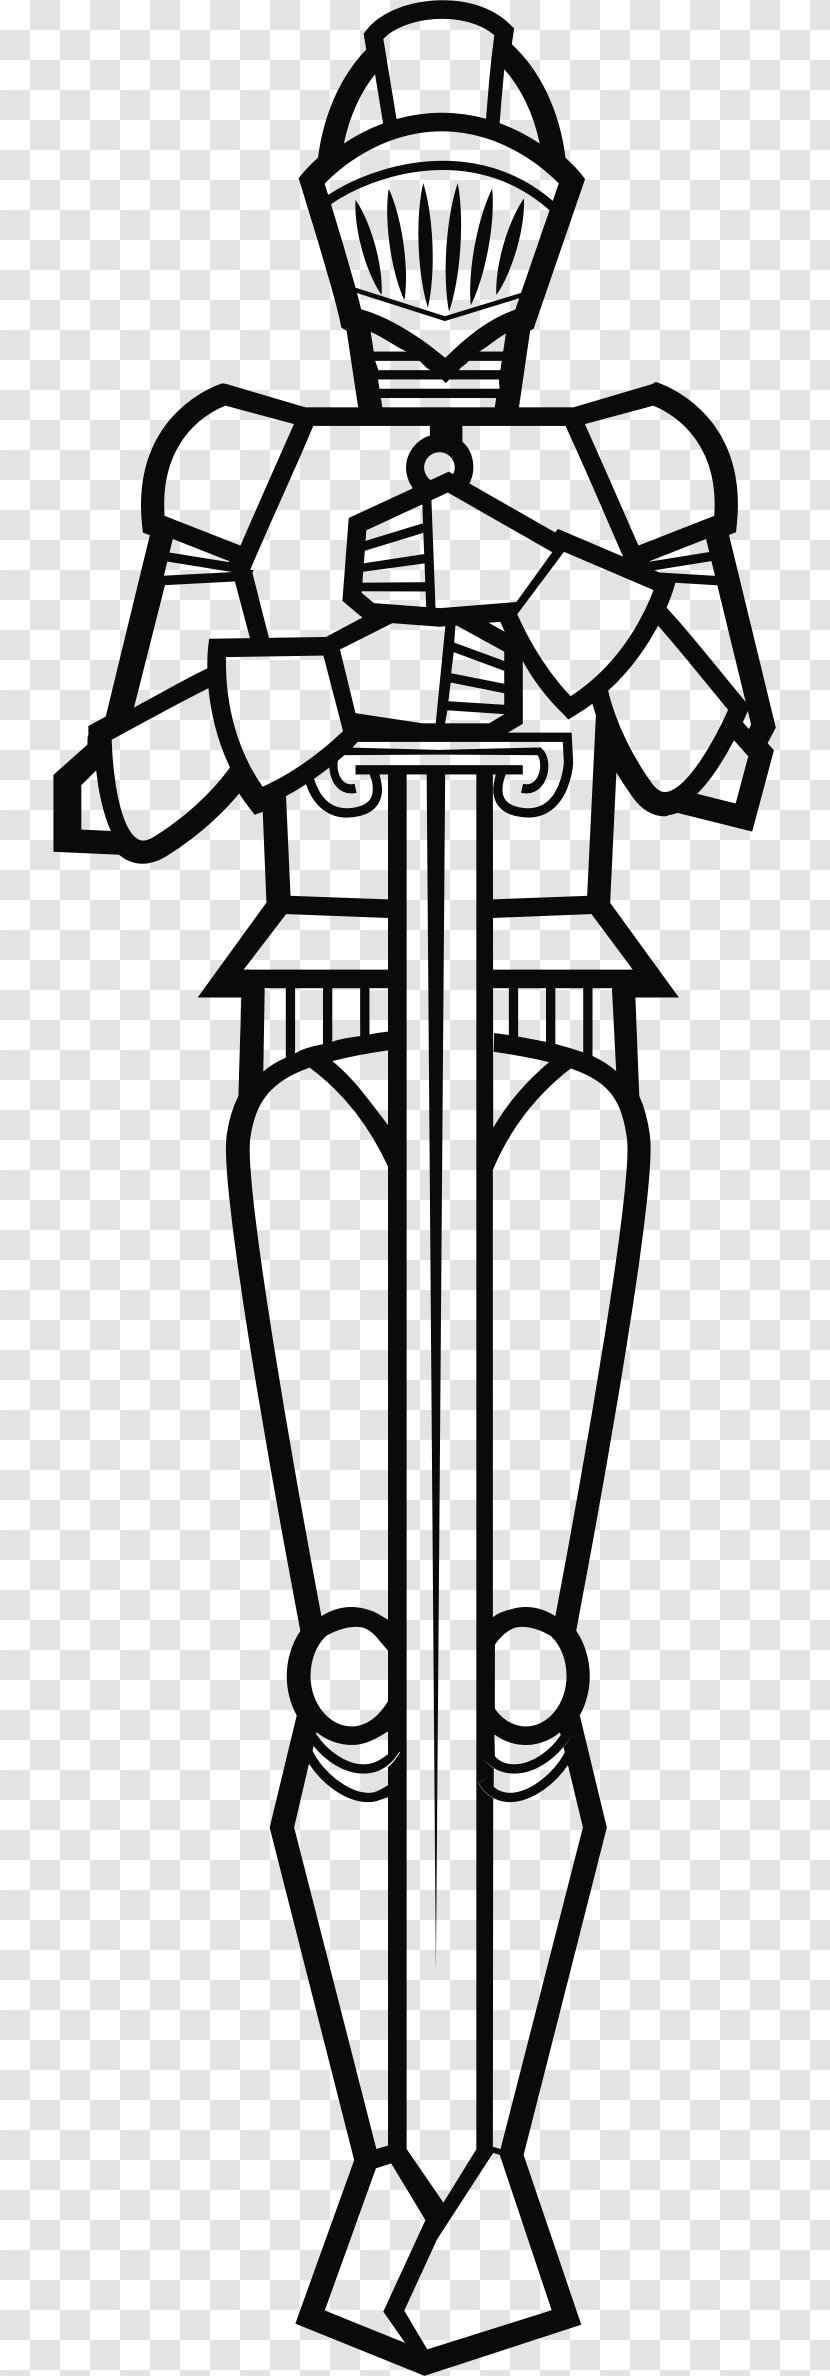 Clip Art - Black And White - Knight Vector Transparent PNG